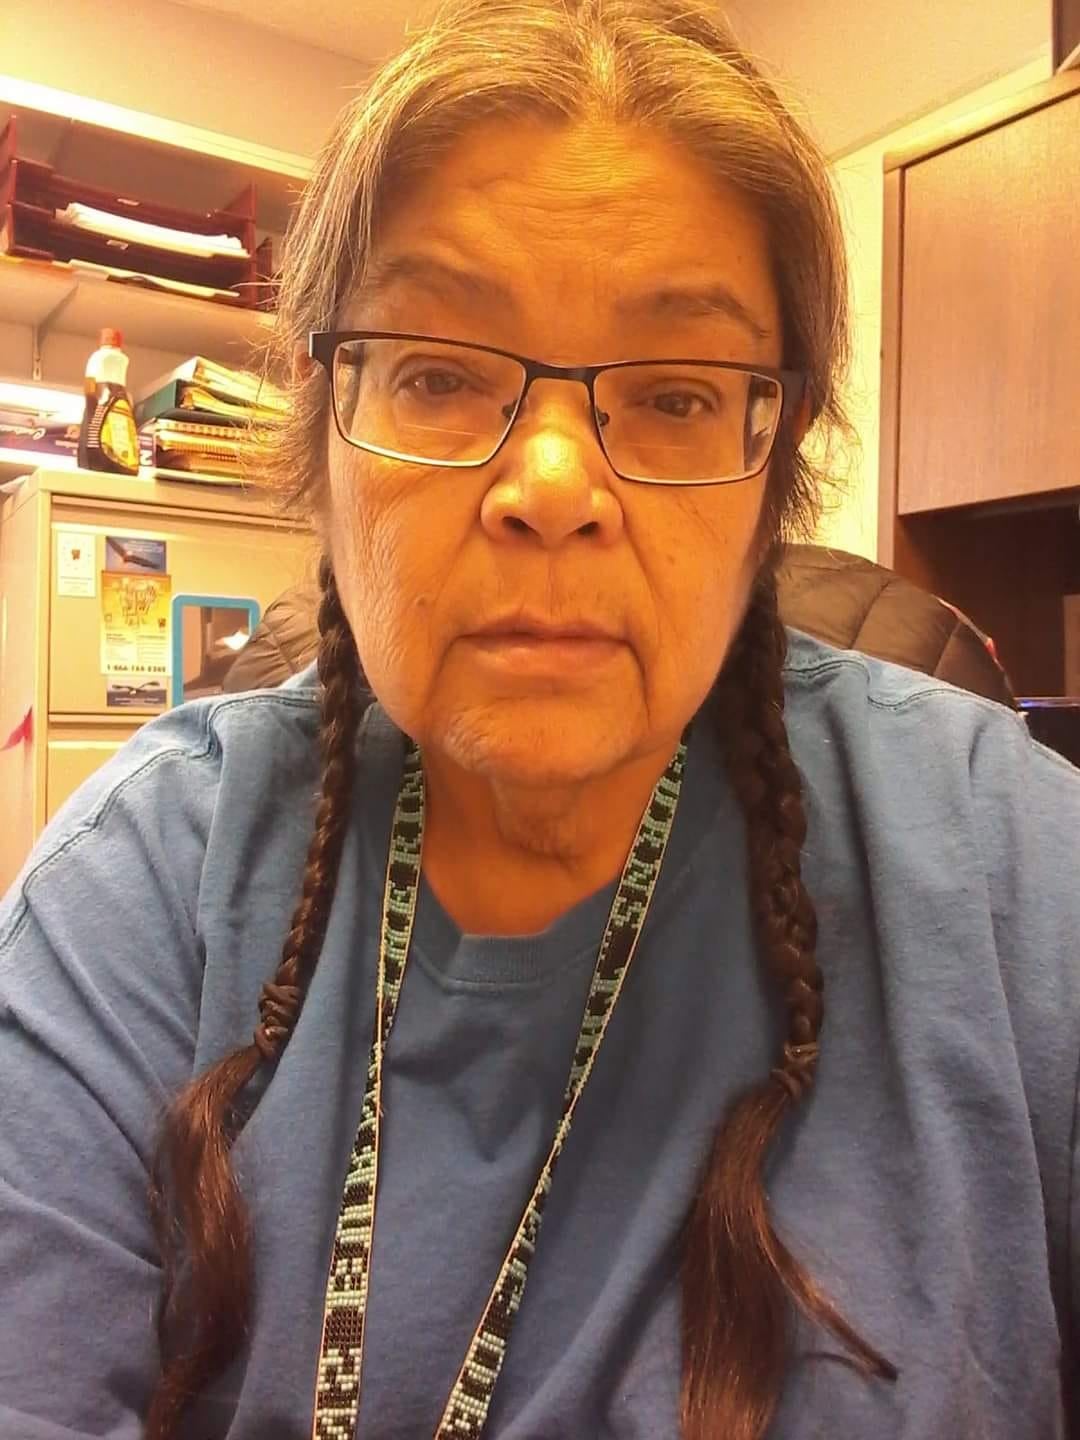 Lydia “Gloria” Burns, 61, died on James Smith Cree Nation acting a first responder during the spate of stabbing attacks that took place in northern Saskatchewan on 4 September 2022